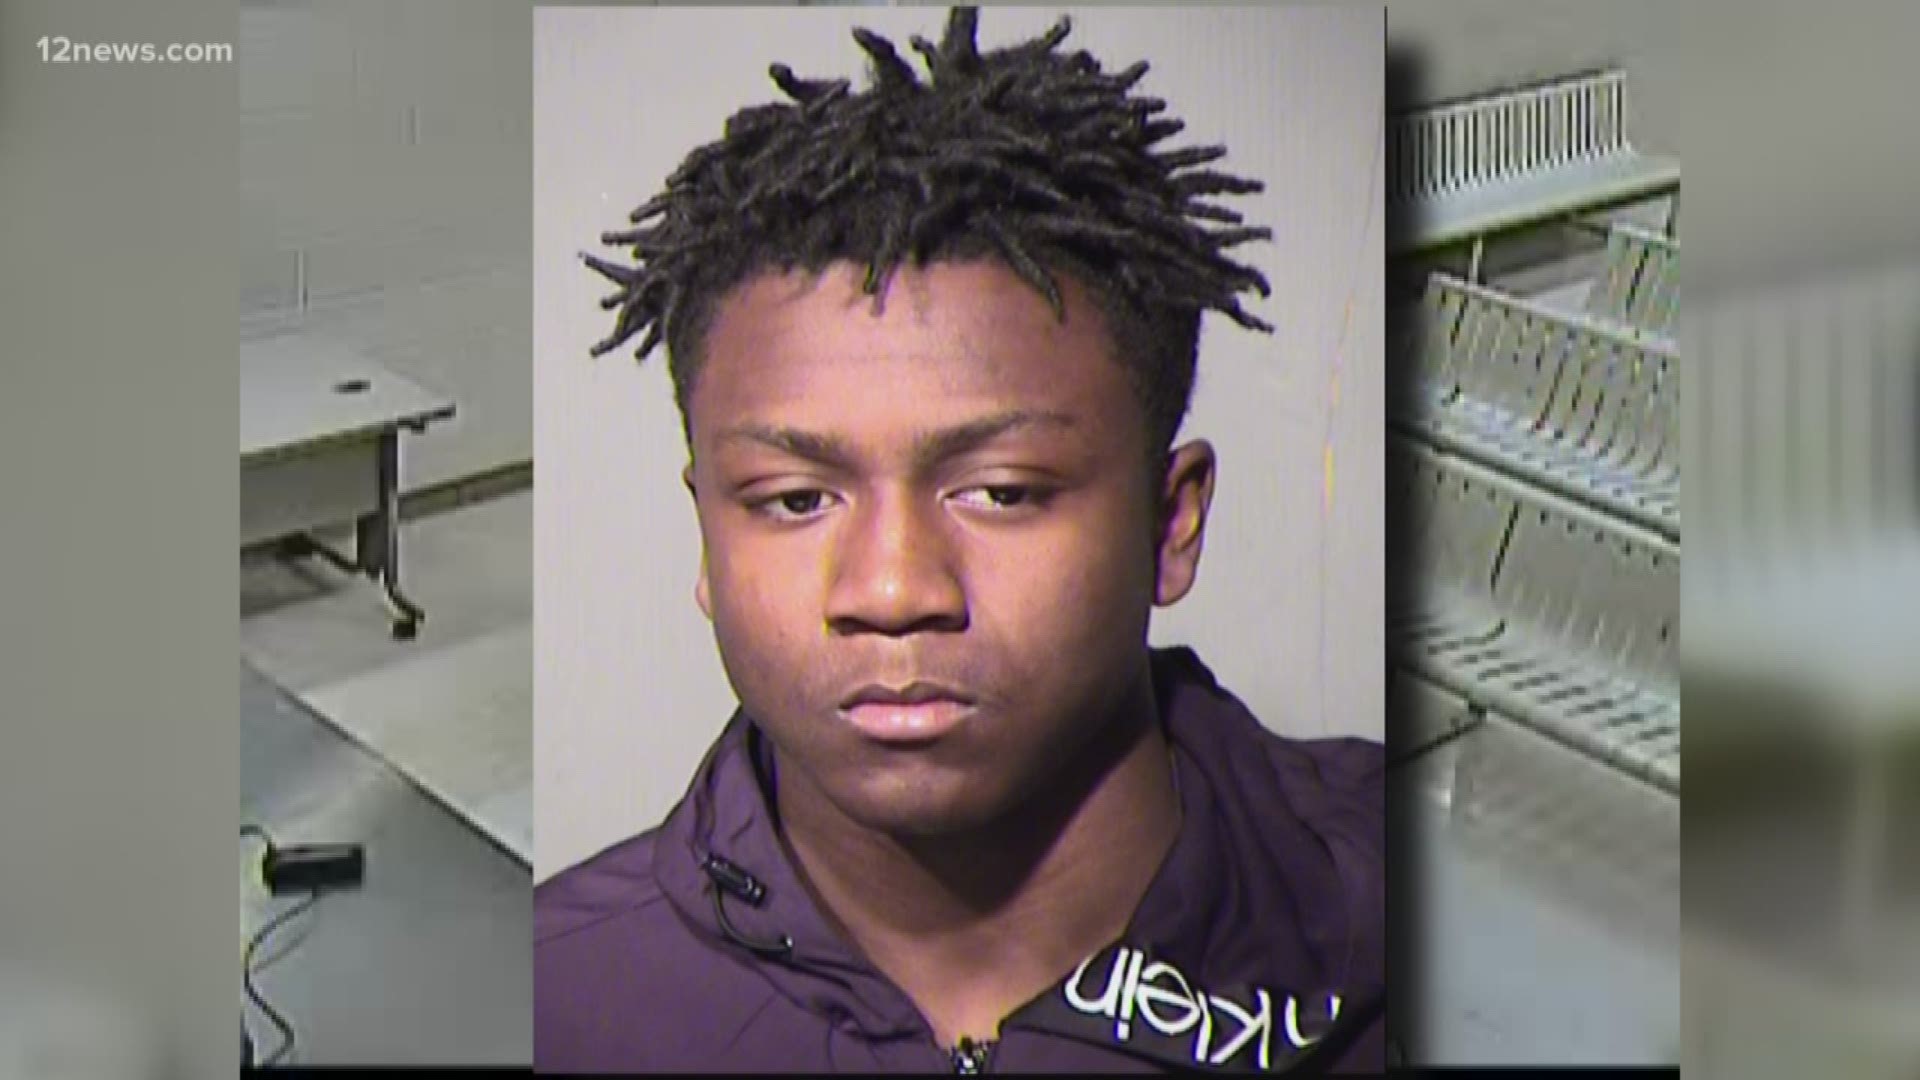 19-year-old Arthur Carter Douglas is facing 4th-degree felony charges after two young children say he showed them obscene pictures on his cell phone while they were in his care at an after-school program at Laveen Elementary.